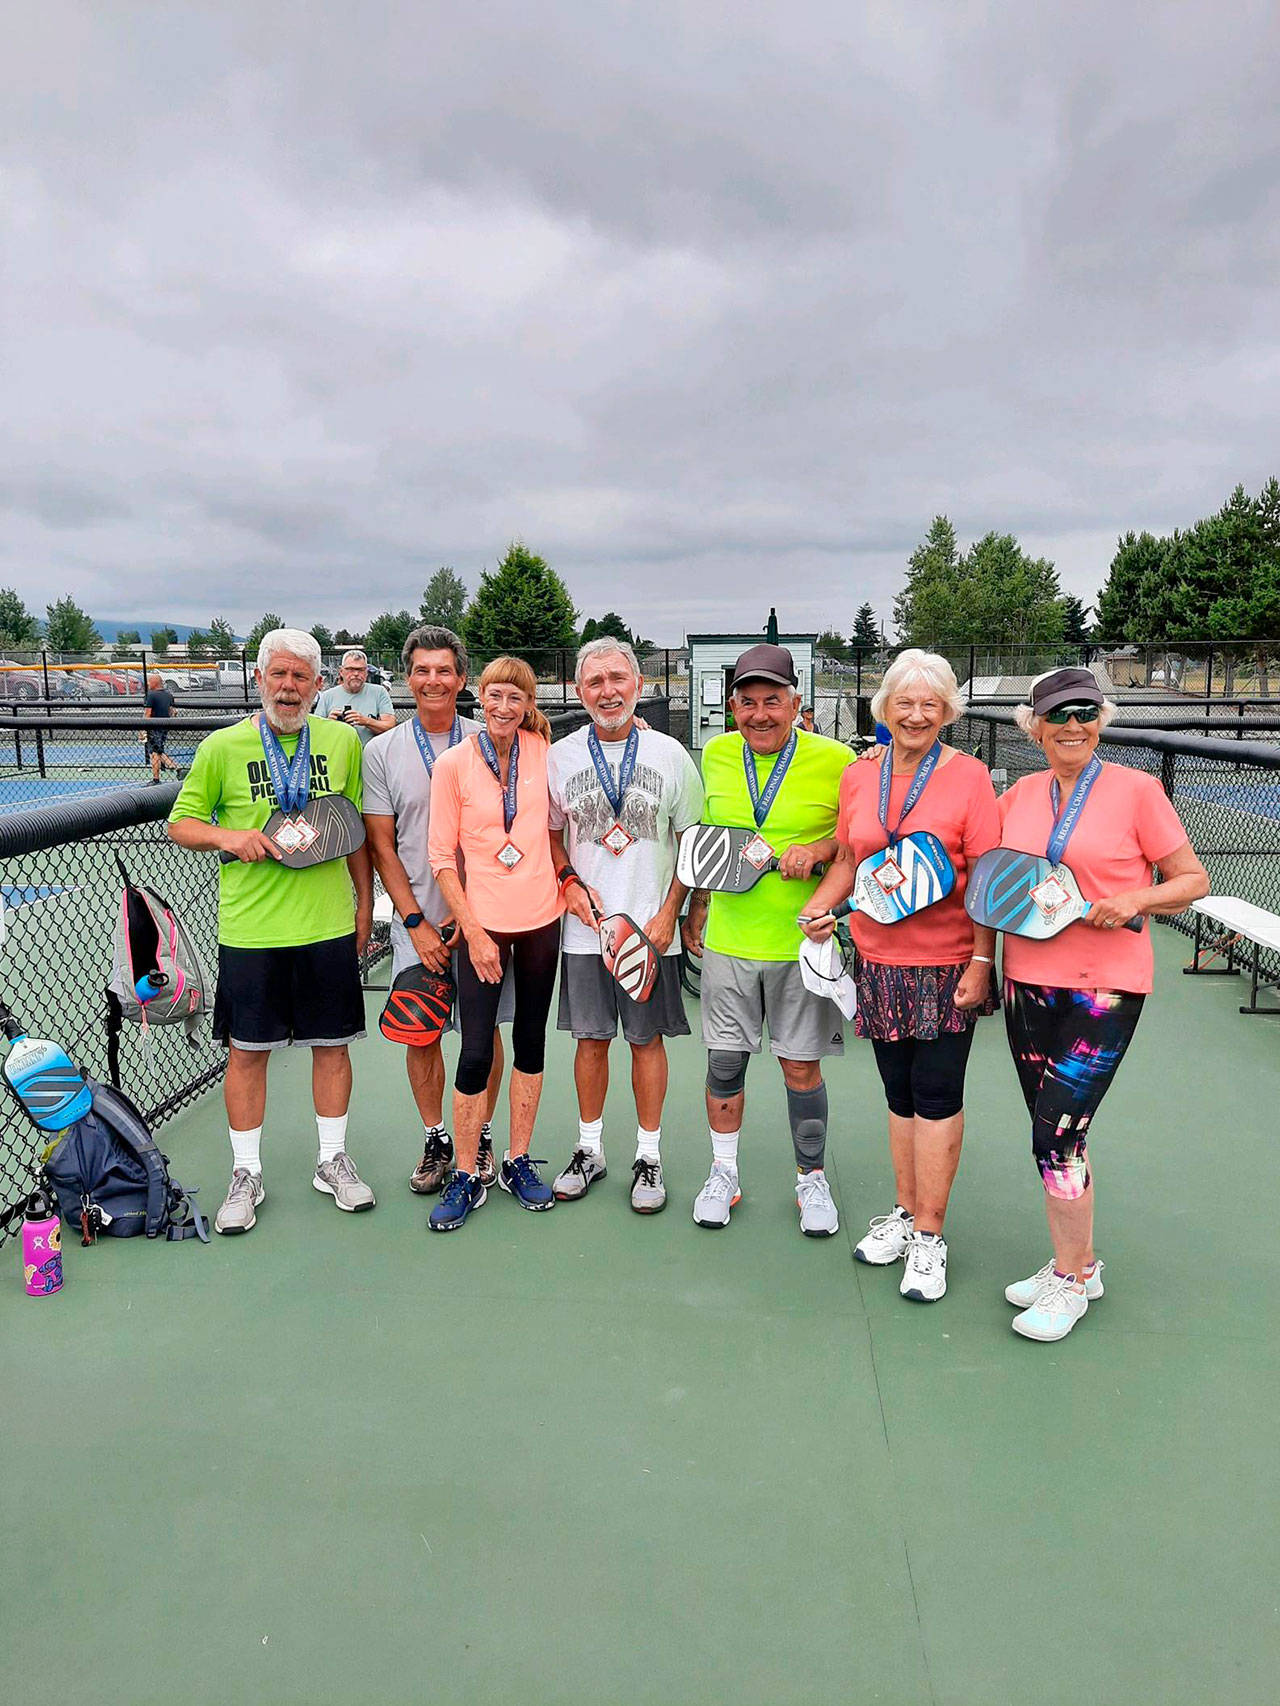 Sequim Picklers members from left, Steve Bennett, Richard Reed, Colleen Alger, John Herbolt, Bob Sester, Jeannie Ramsey and Beverly Hoffman were part of 14-strong Sequim Picklers contingent that competed at the 2021 USA Pickleball Pacific Northwest Regional Championship in Boise, Idaho, last month. Submitted photo